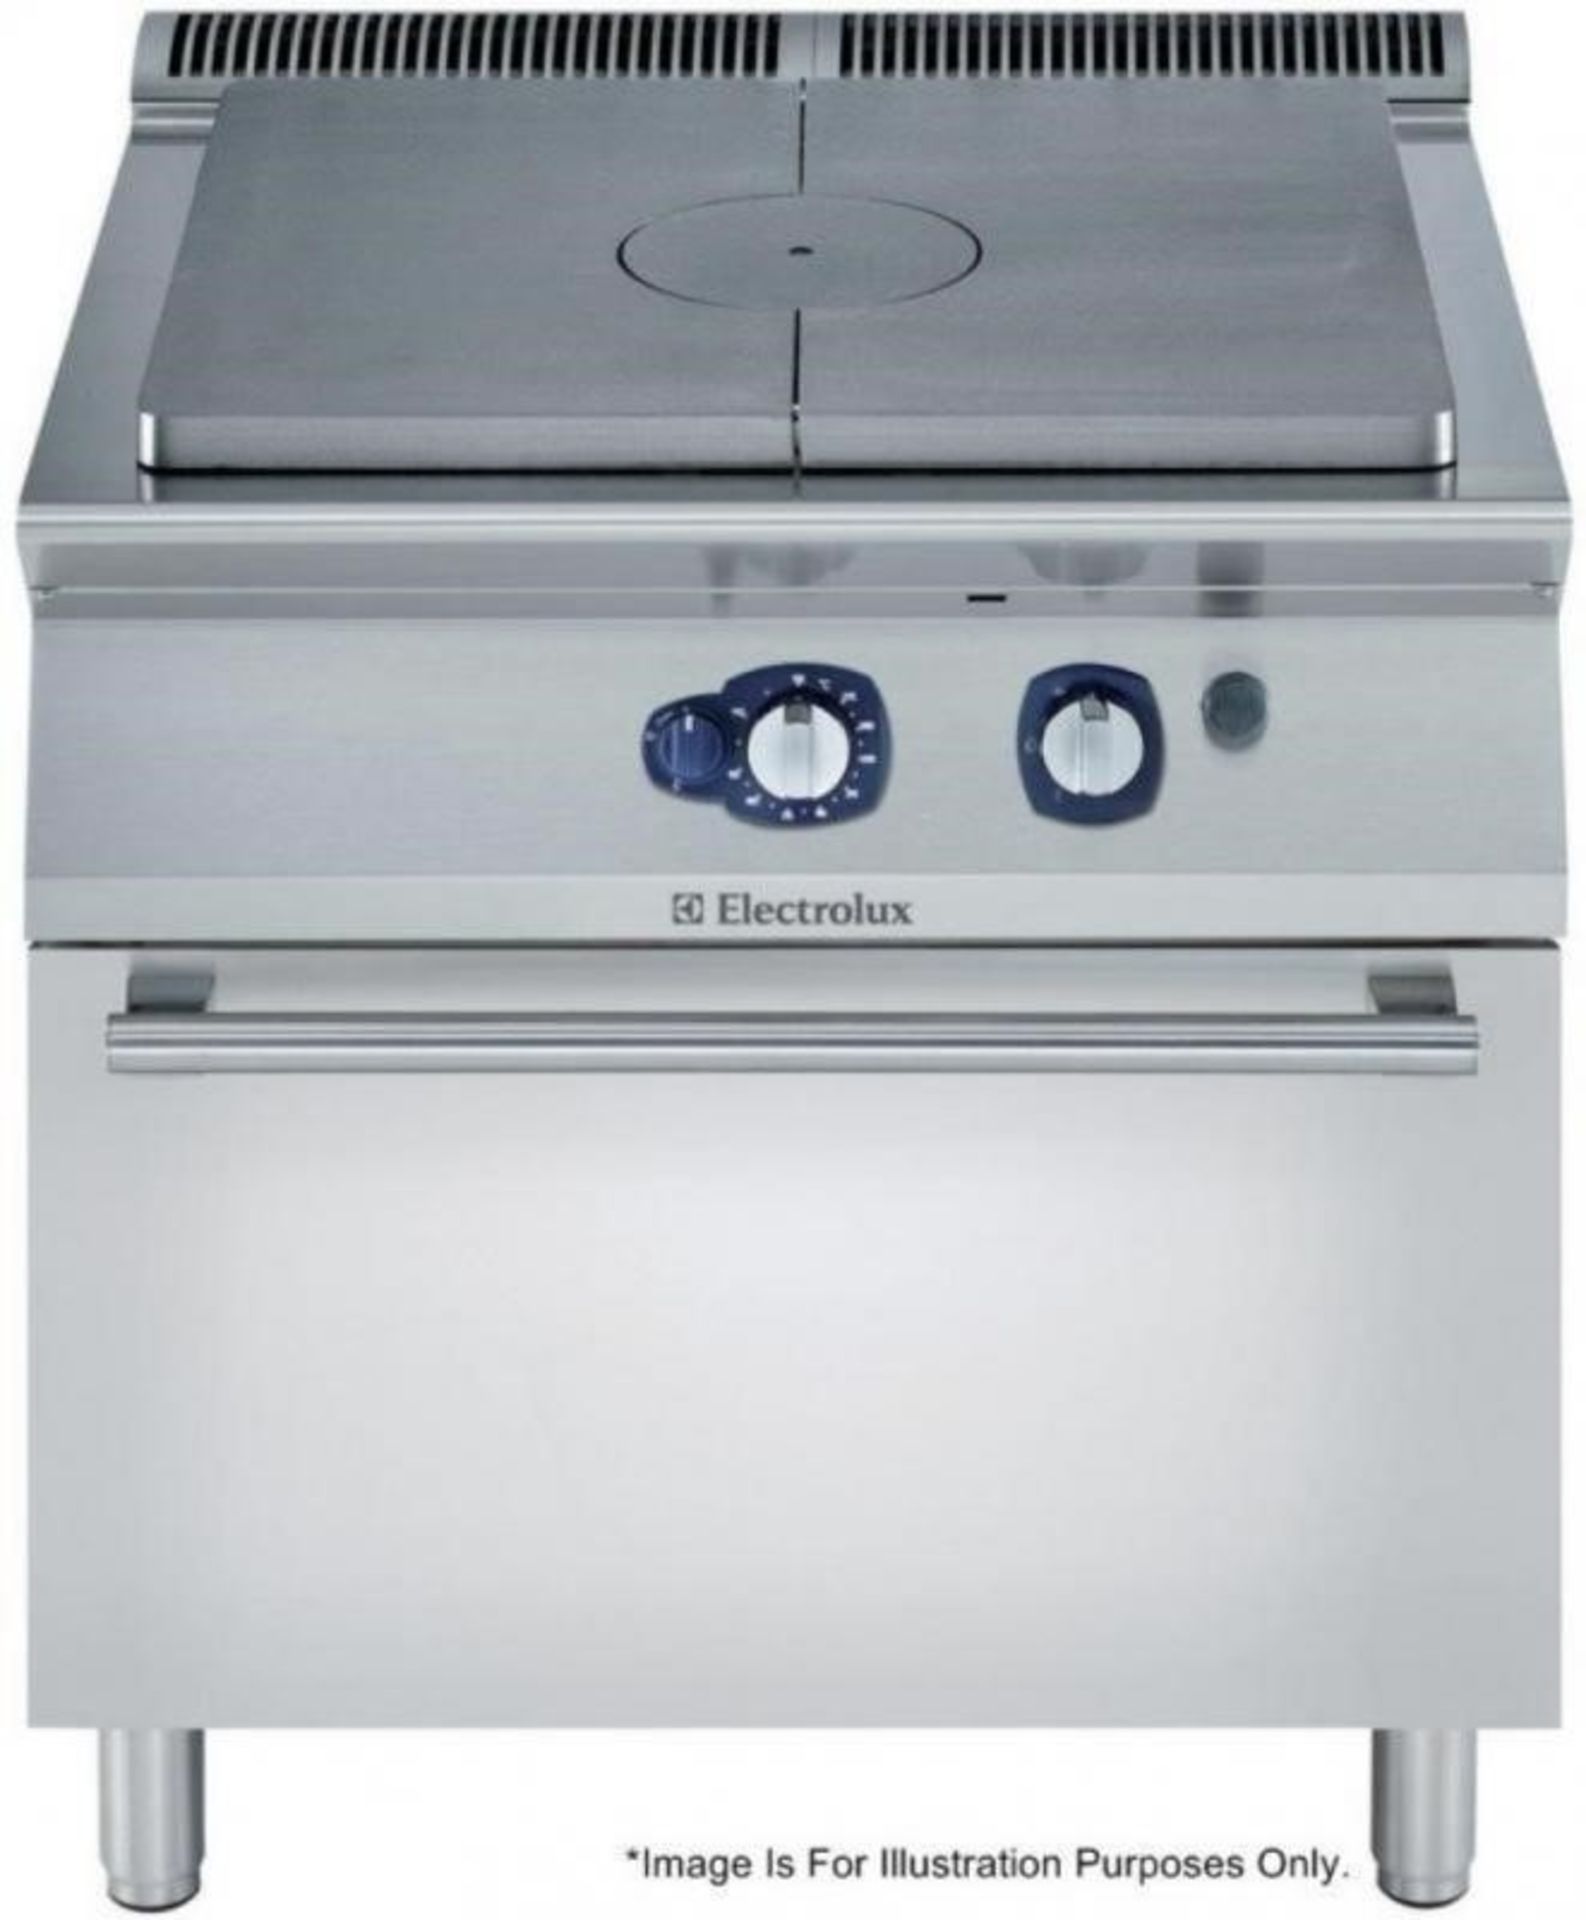 1 x Electrolux Commercial Stainless Steel Solid Top Oven With a Durable Cast-iron Cooking Surface - - Image 7 of 8